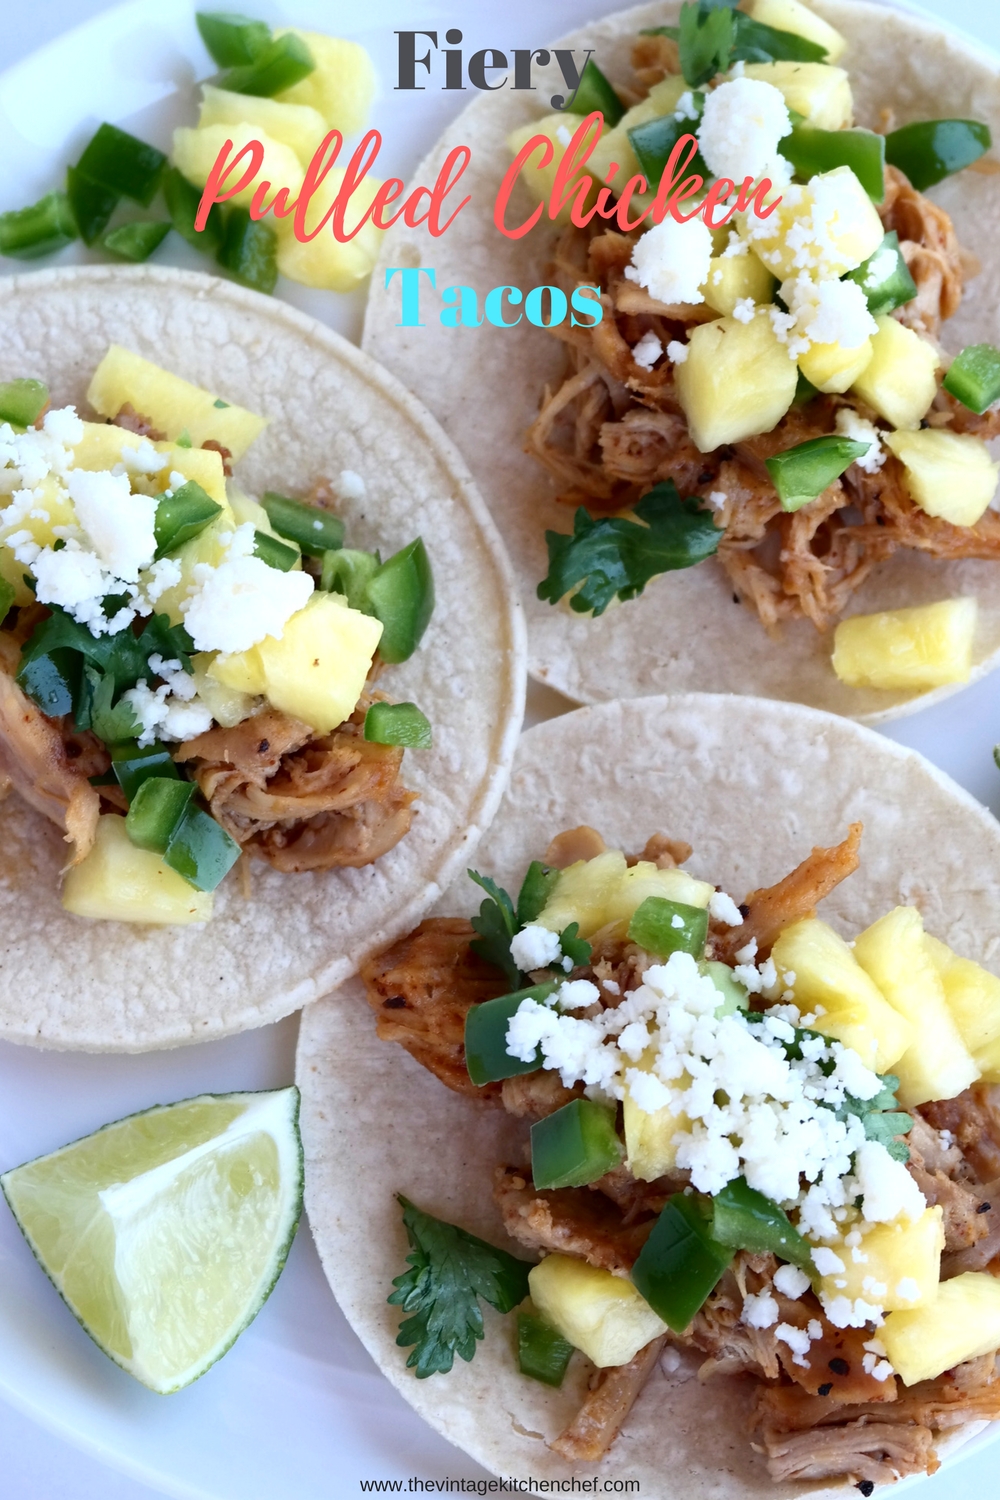 Fiery Pulled Chicken Tacos are full of heat and flavor! They're easy, delicious and are a great way to spice up your family dinner or feed a crowd. 